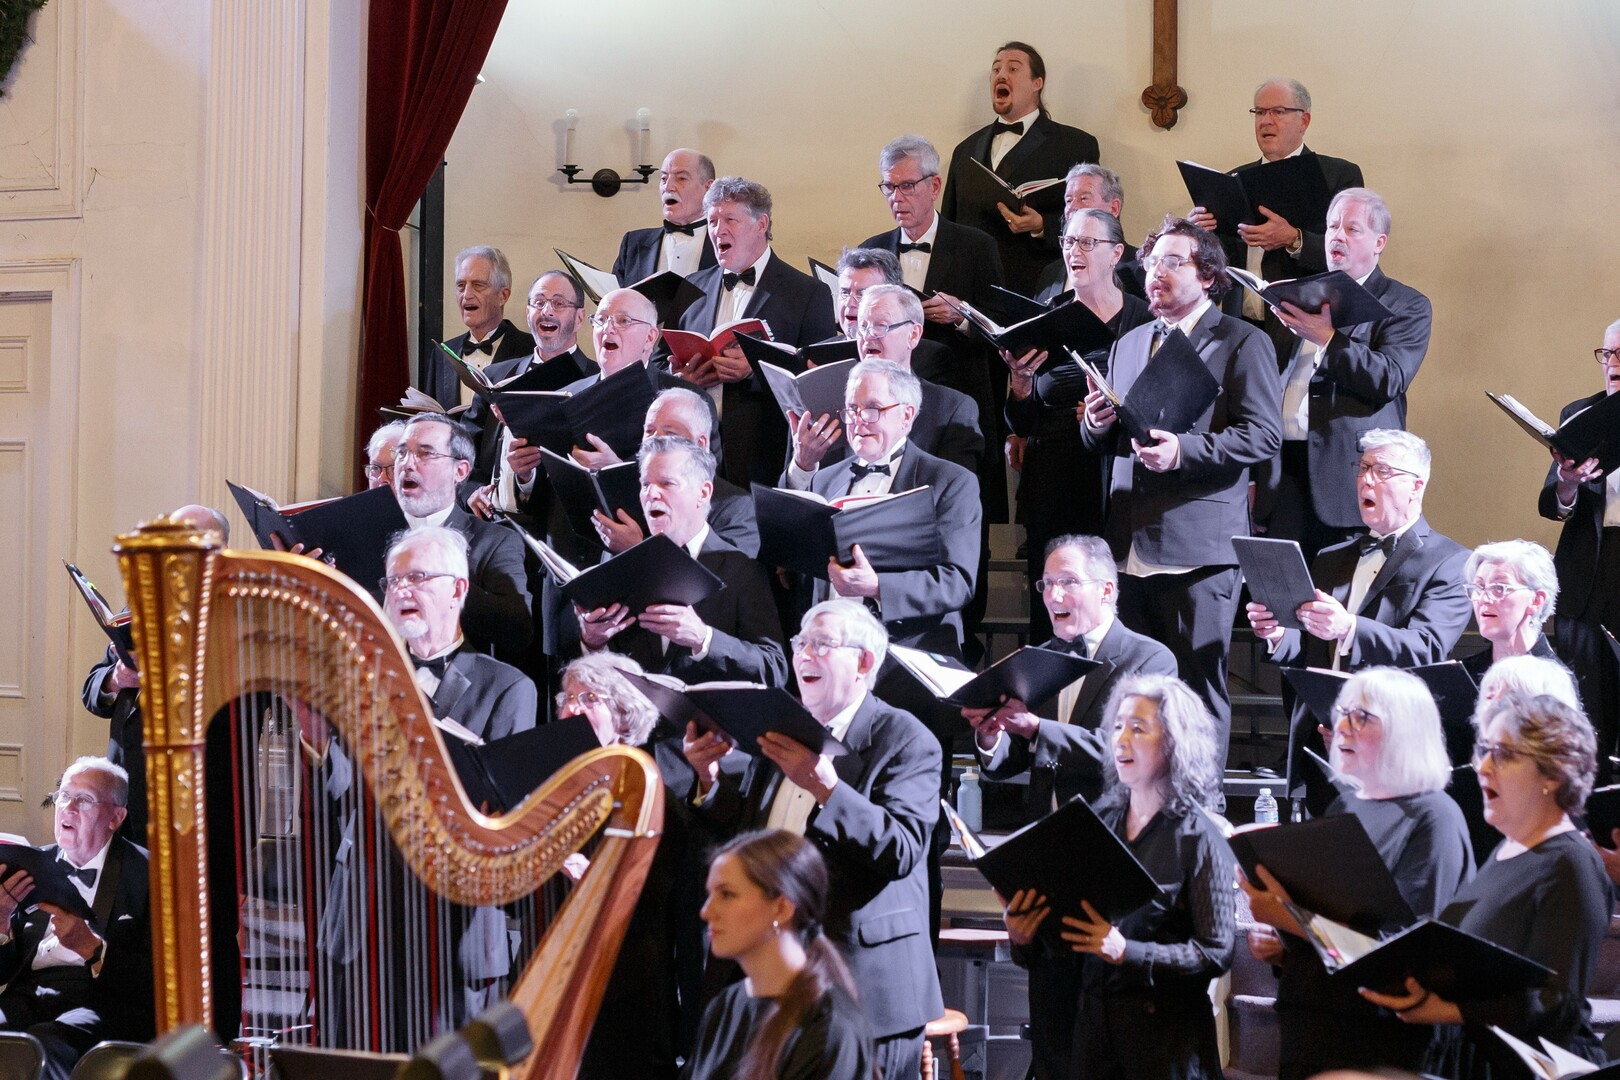 Newburyport Choral Society Spring Concert: Resilience and Hope, West Newbury, Massachusetts, United States